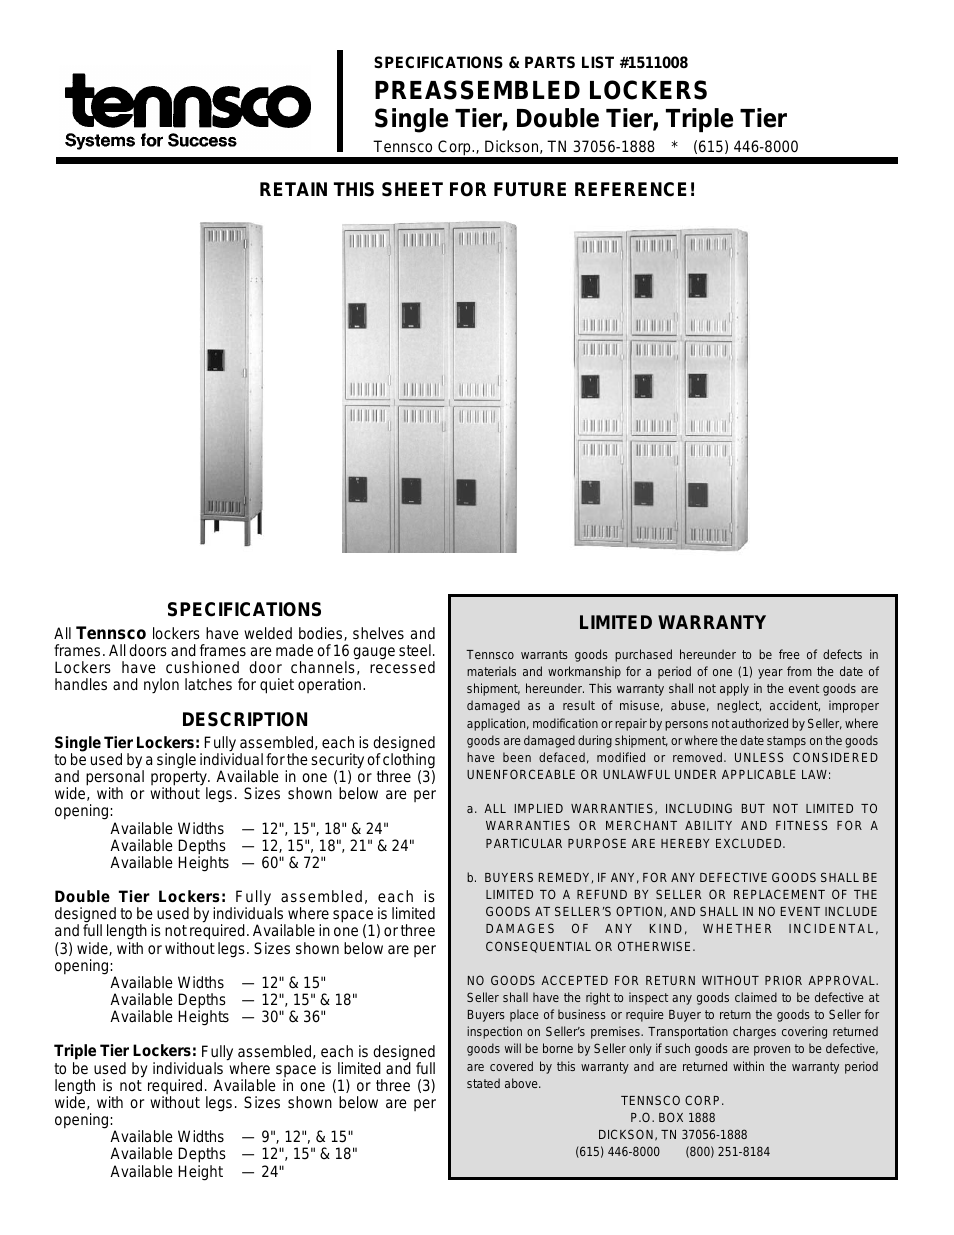 Preassembled Lockers Single, Double,and Triple Tier